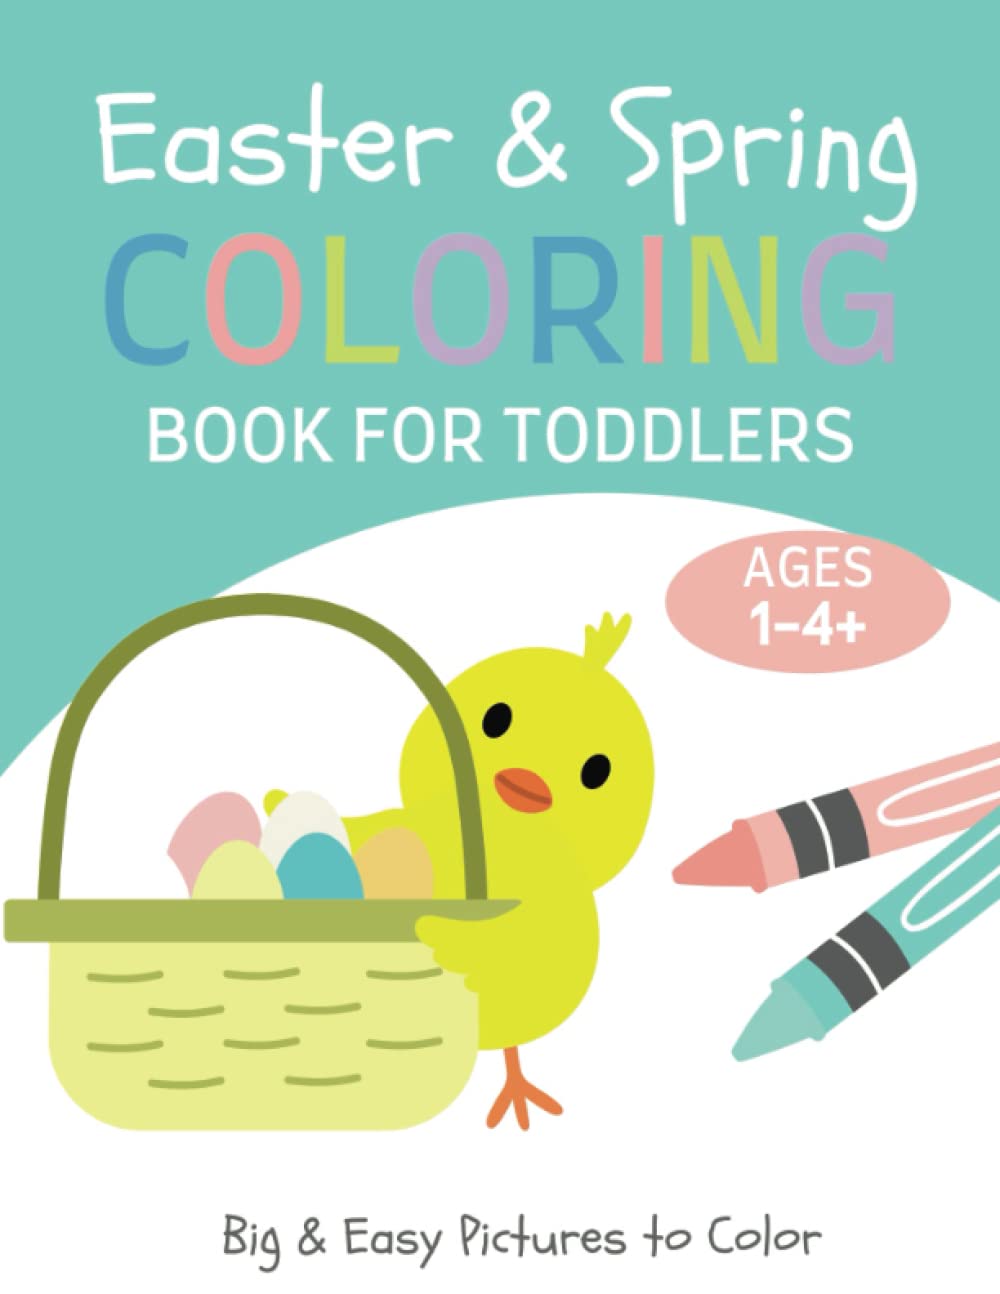 Easter & Spring Coloring Book for Toddlers Ages 1-4+: Simple And Fun Coloring Pages For Toddler, Kids 1, 2, 3, 4, Preschool and Kindergarten